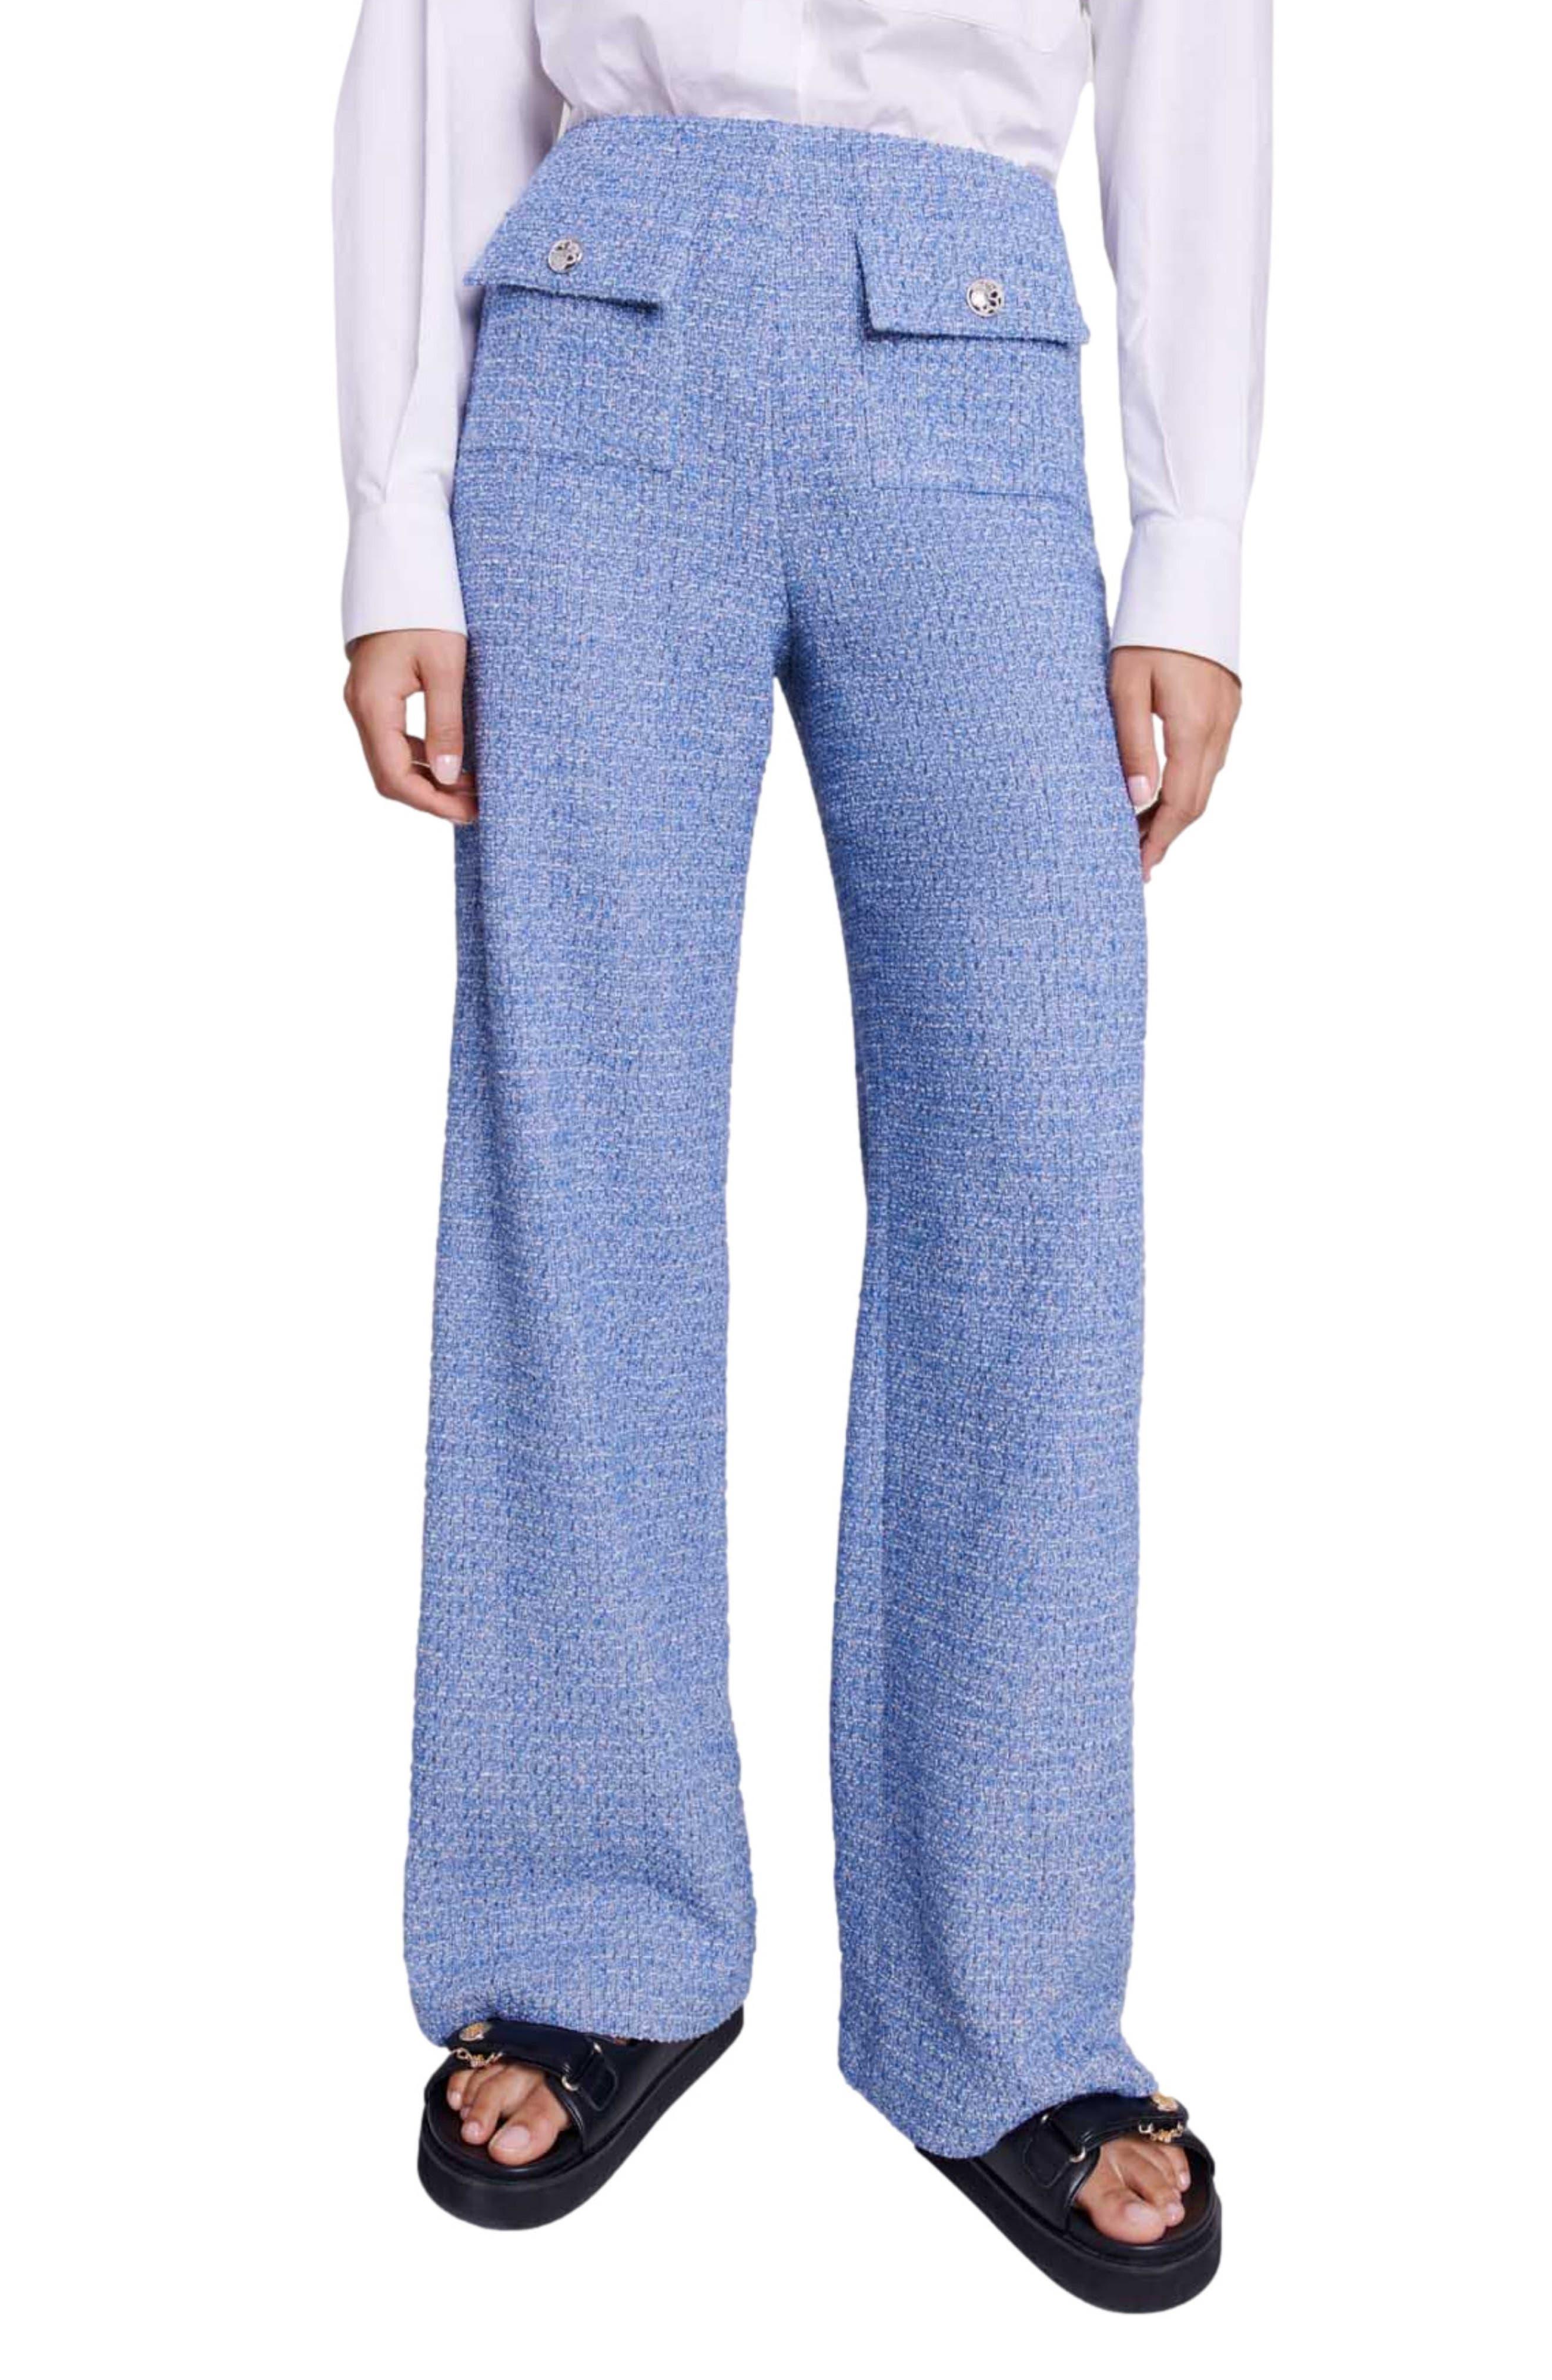 Maje Pablito Cotton Blend Tweed Pants in Blue | Lyst